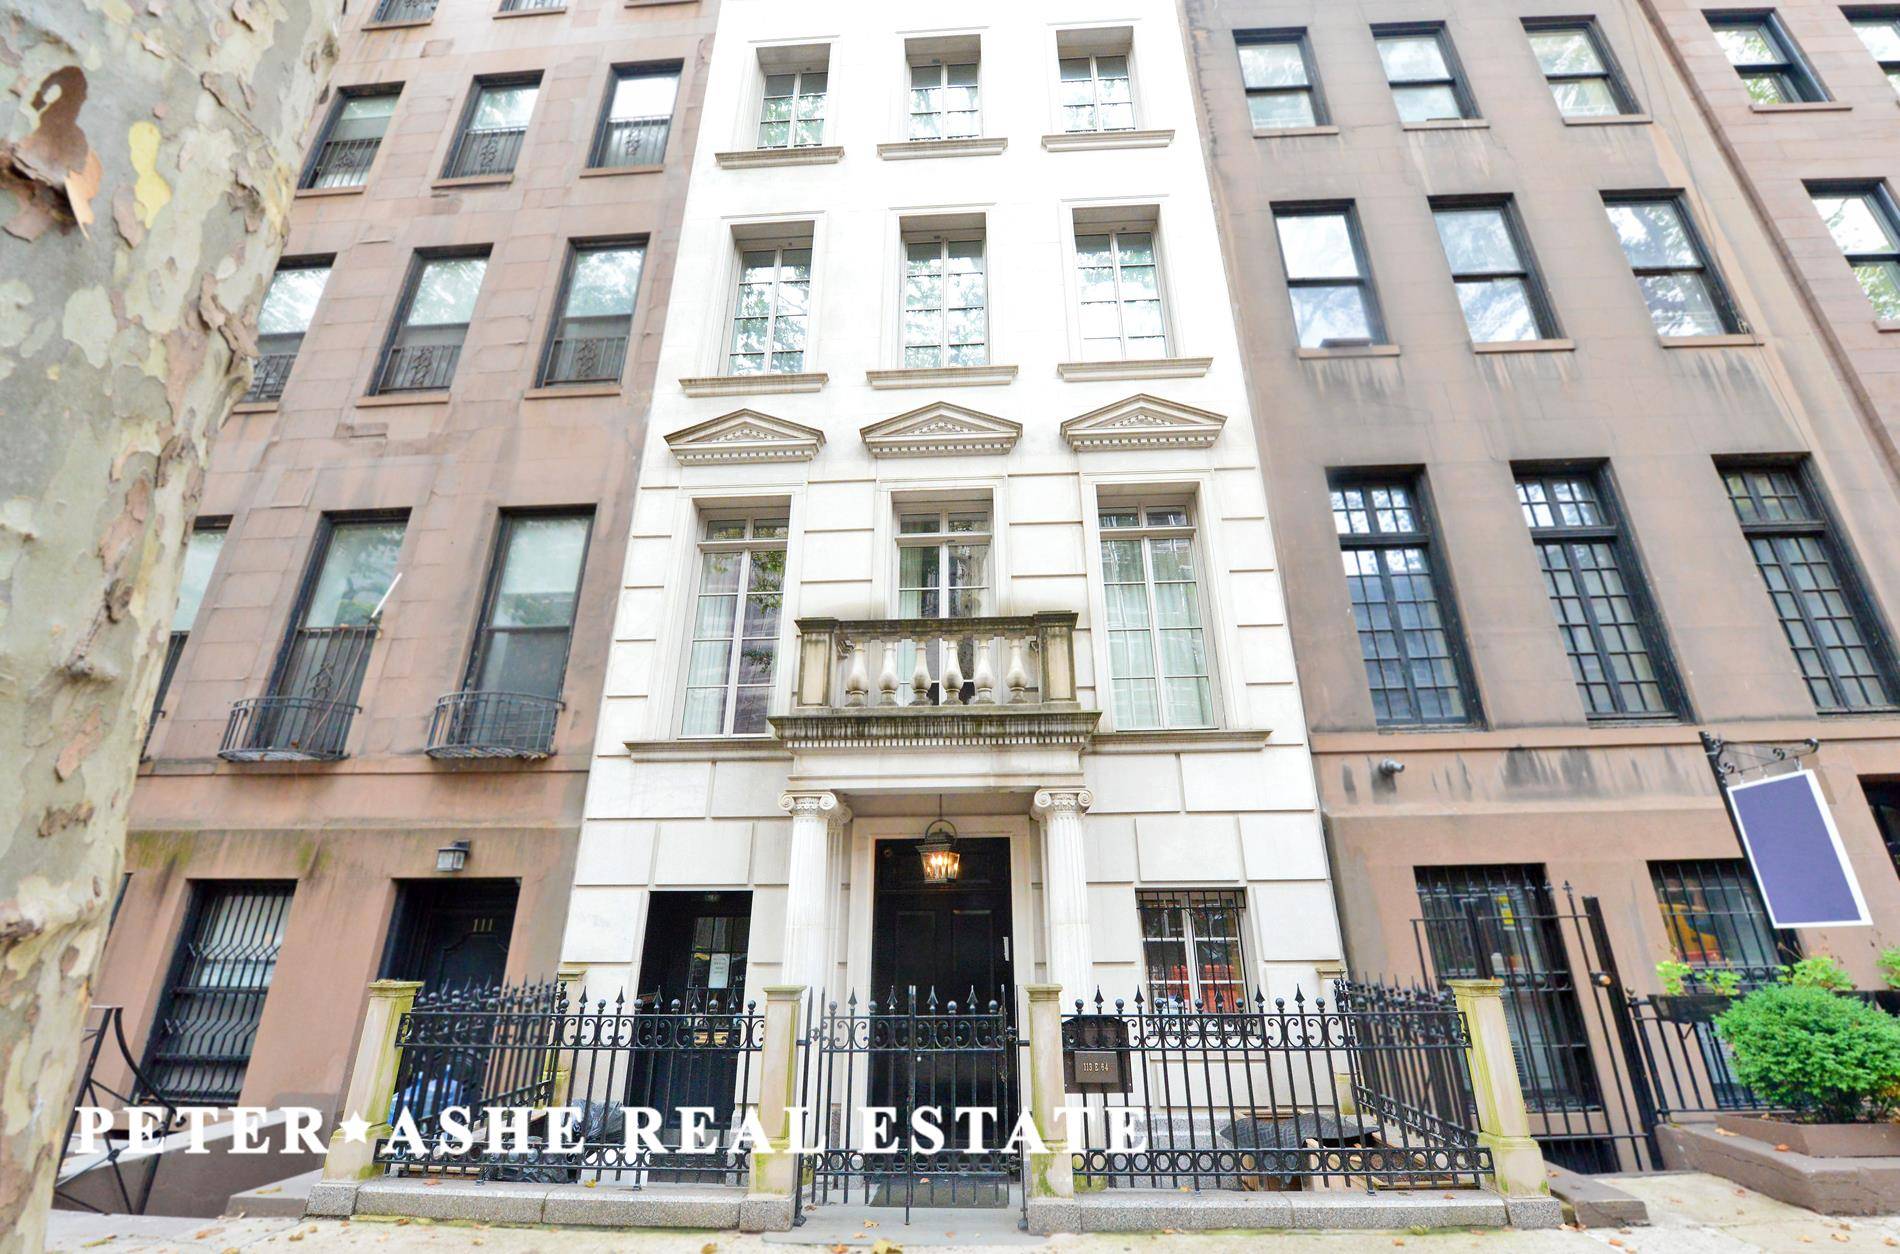 Prime medical office space located on the ground floor of a beautiful Upper East Side Townhouse.